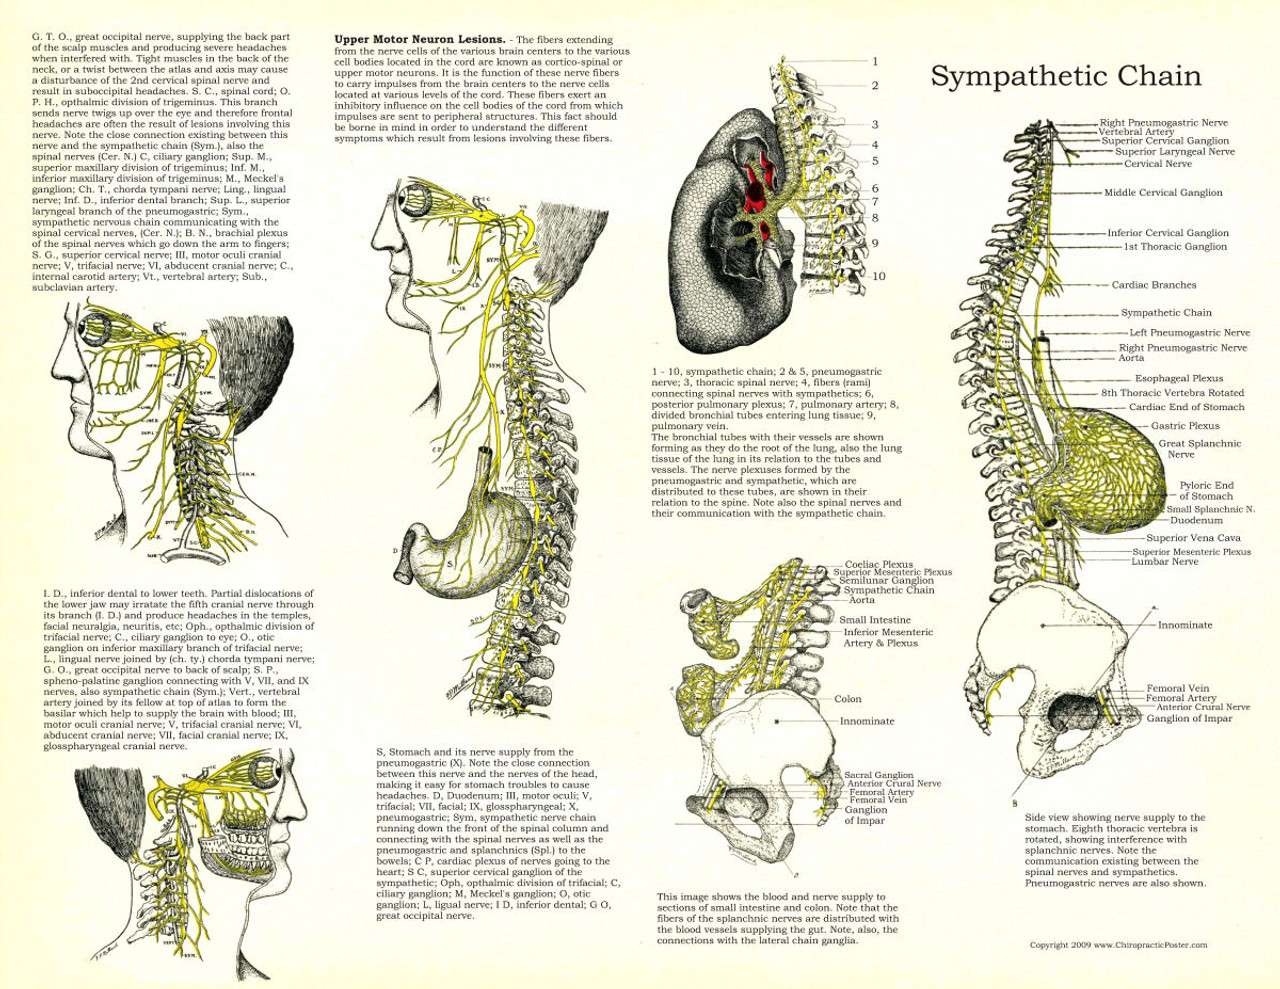 Osteopathic - Chiropractic Laminated Posters -Set of 3